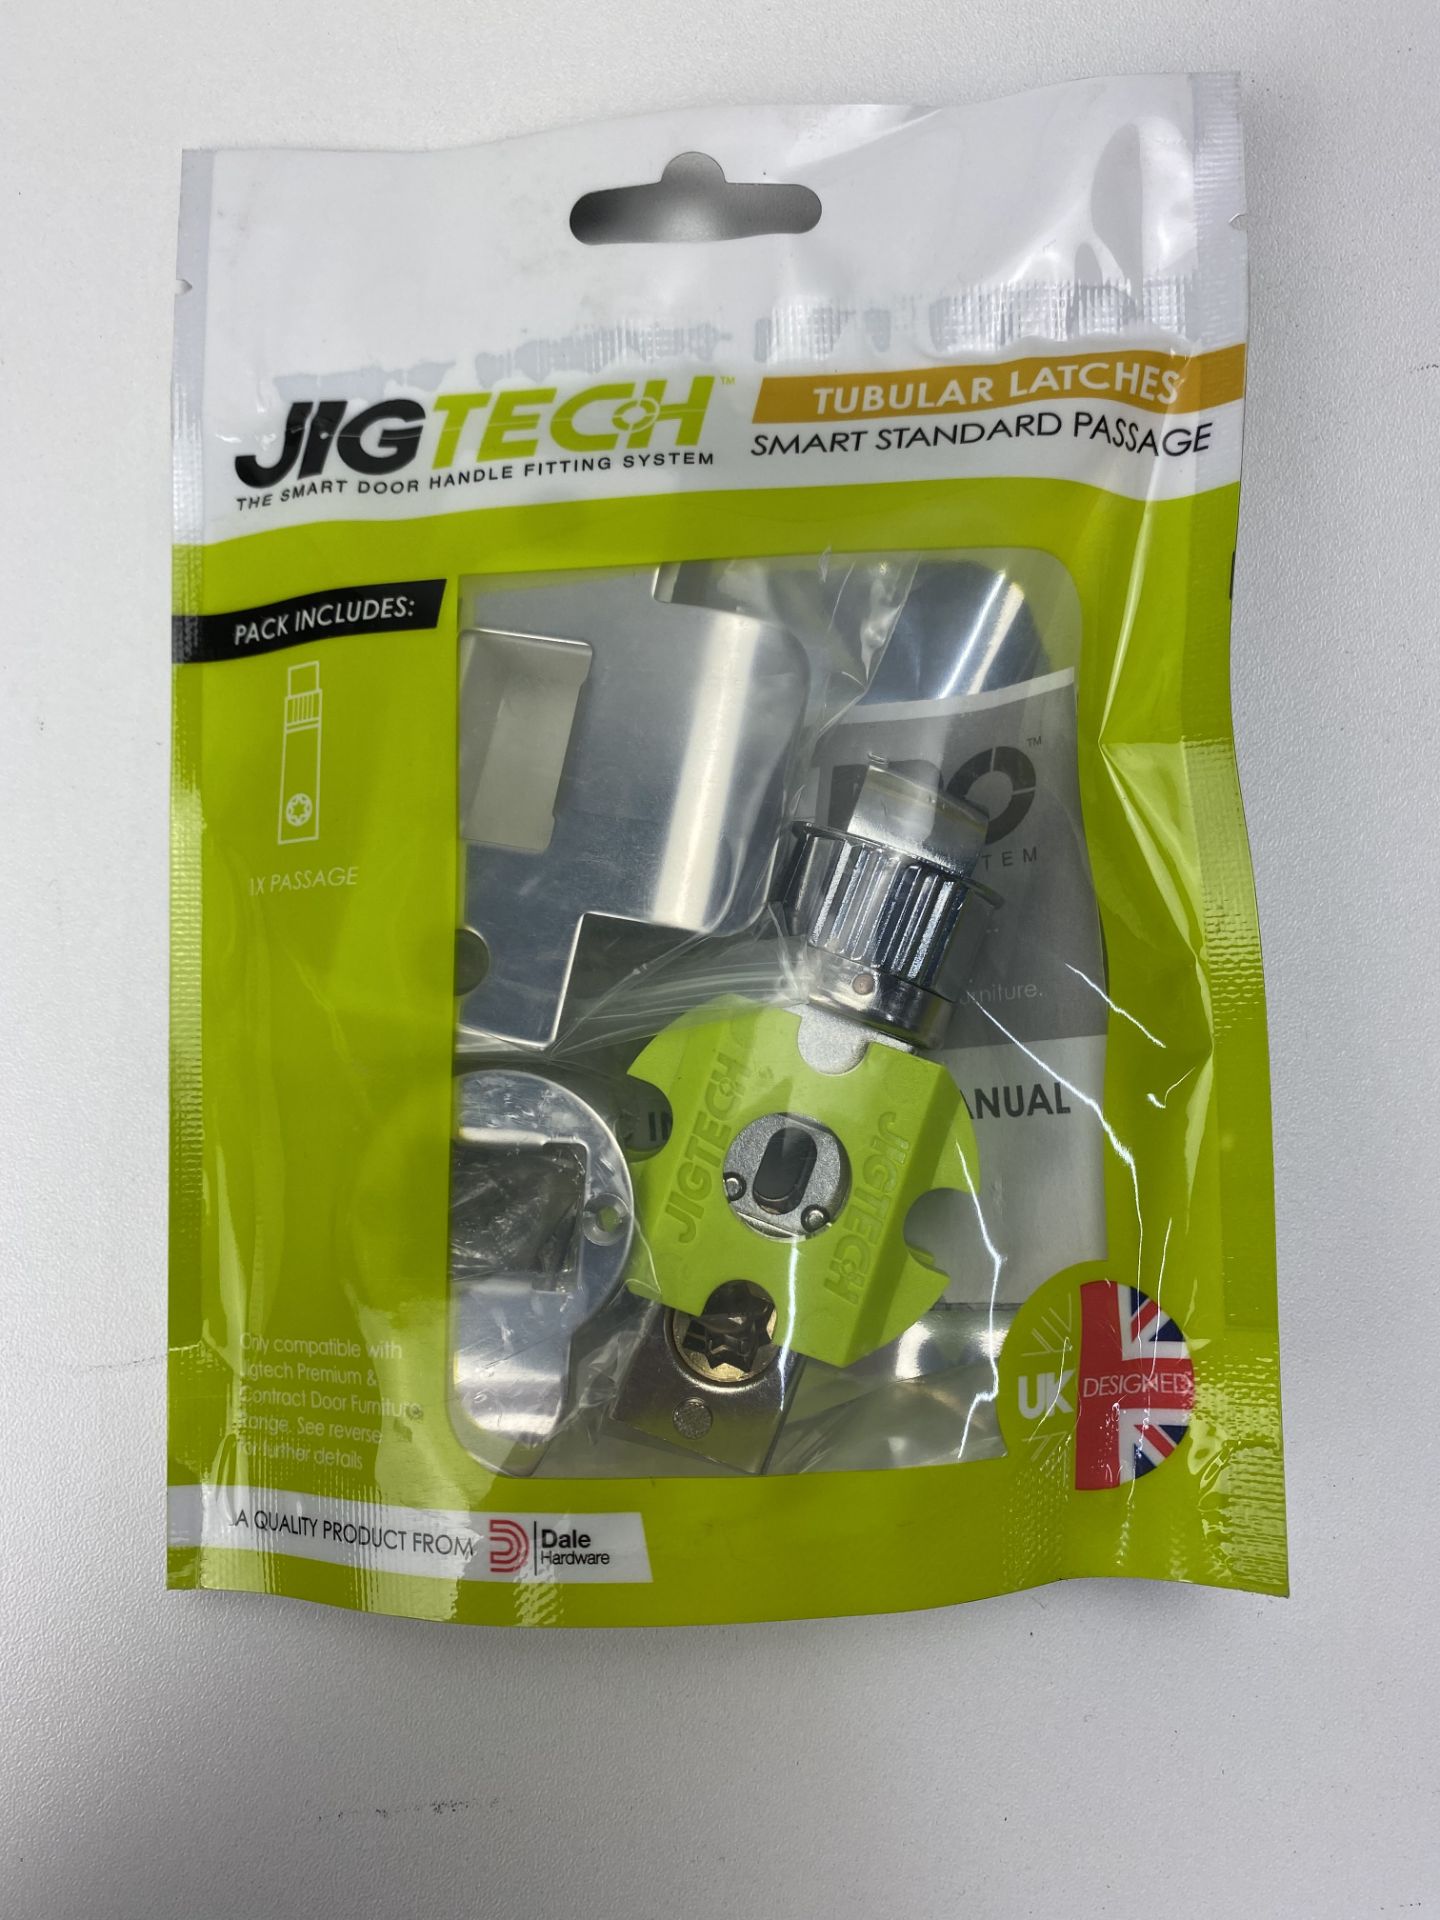 Mixed Lot Of Jigtech Latches - Image 2 of 6